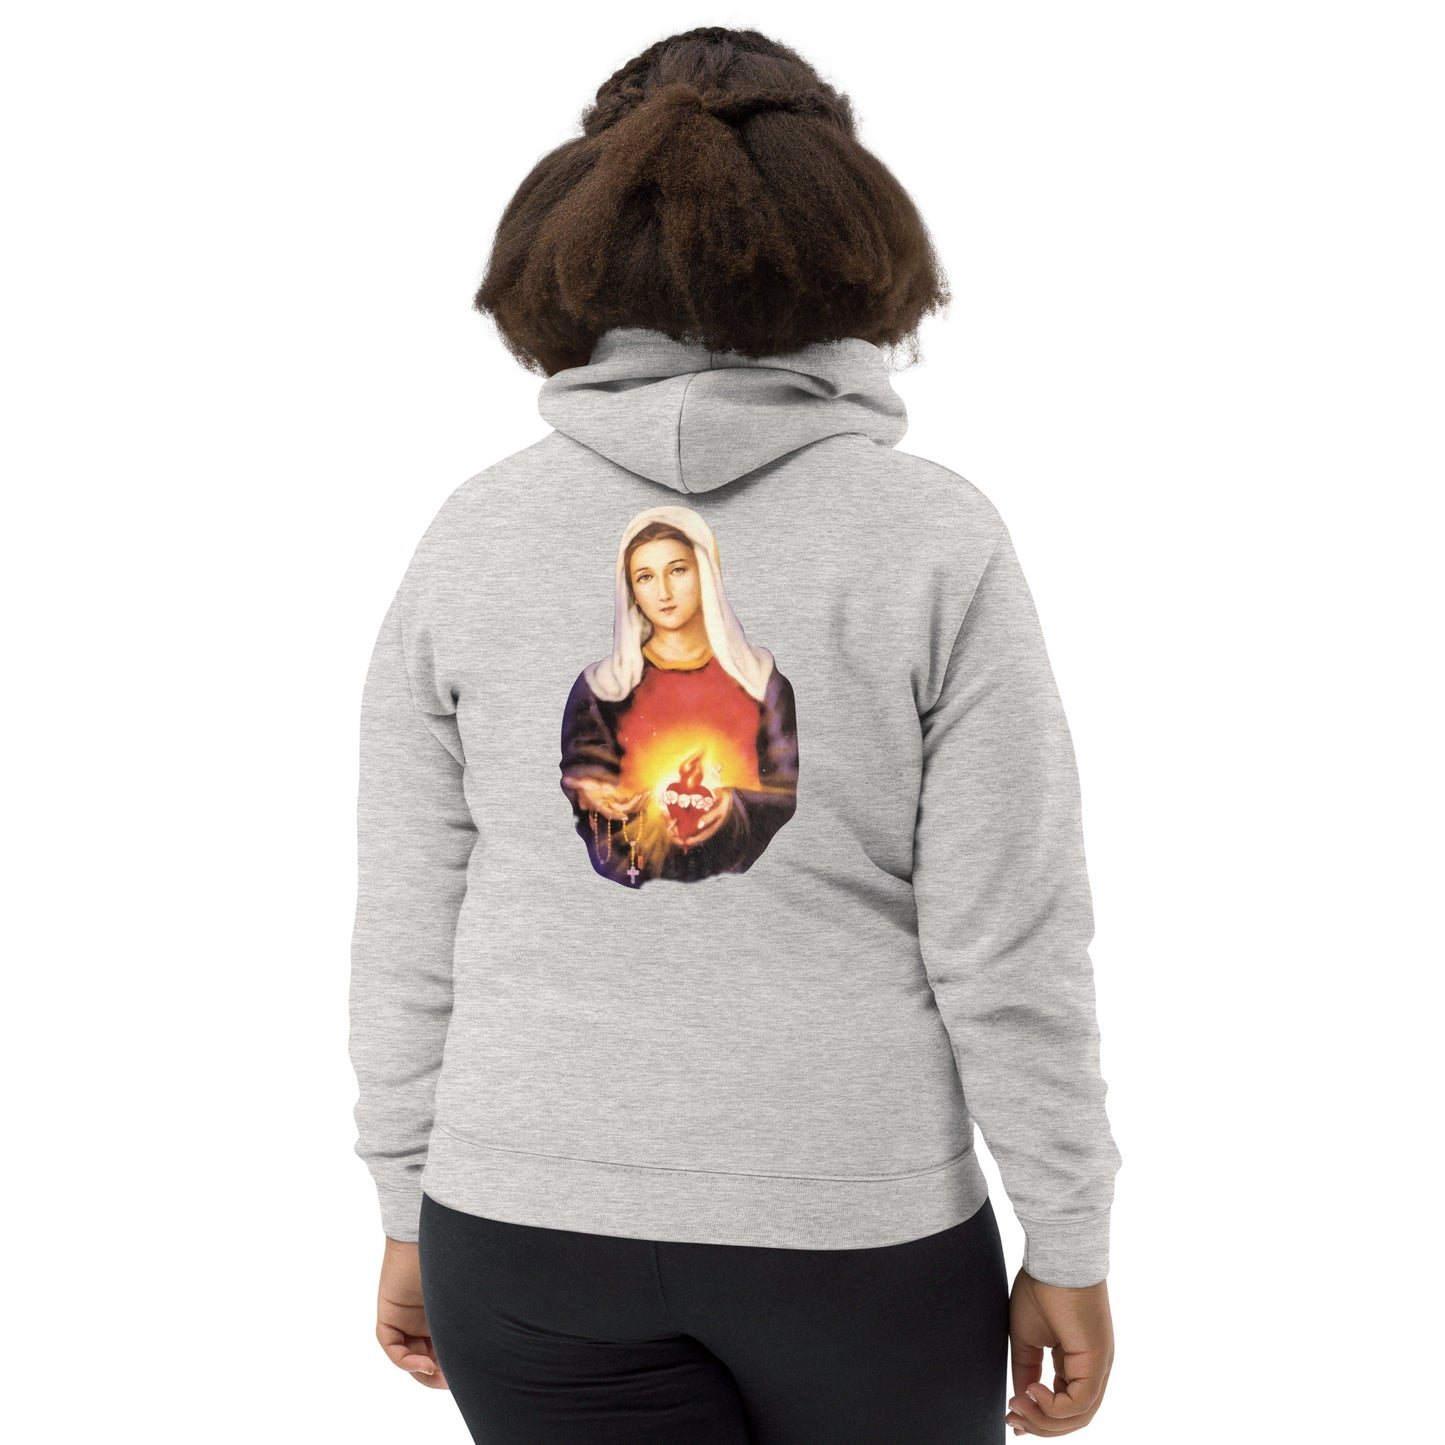 Sacred Heart of Jesus and Immaculate Heart of Mary Children's Hoodie